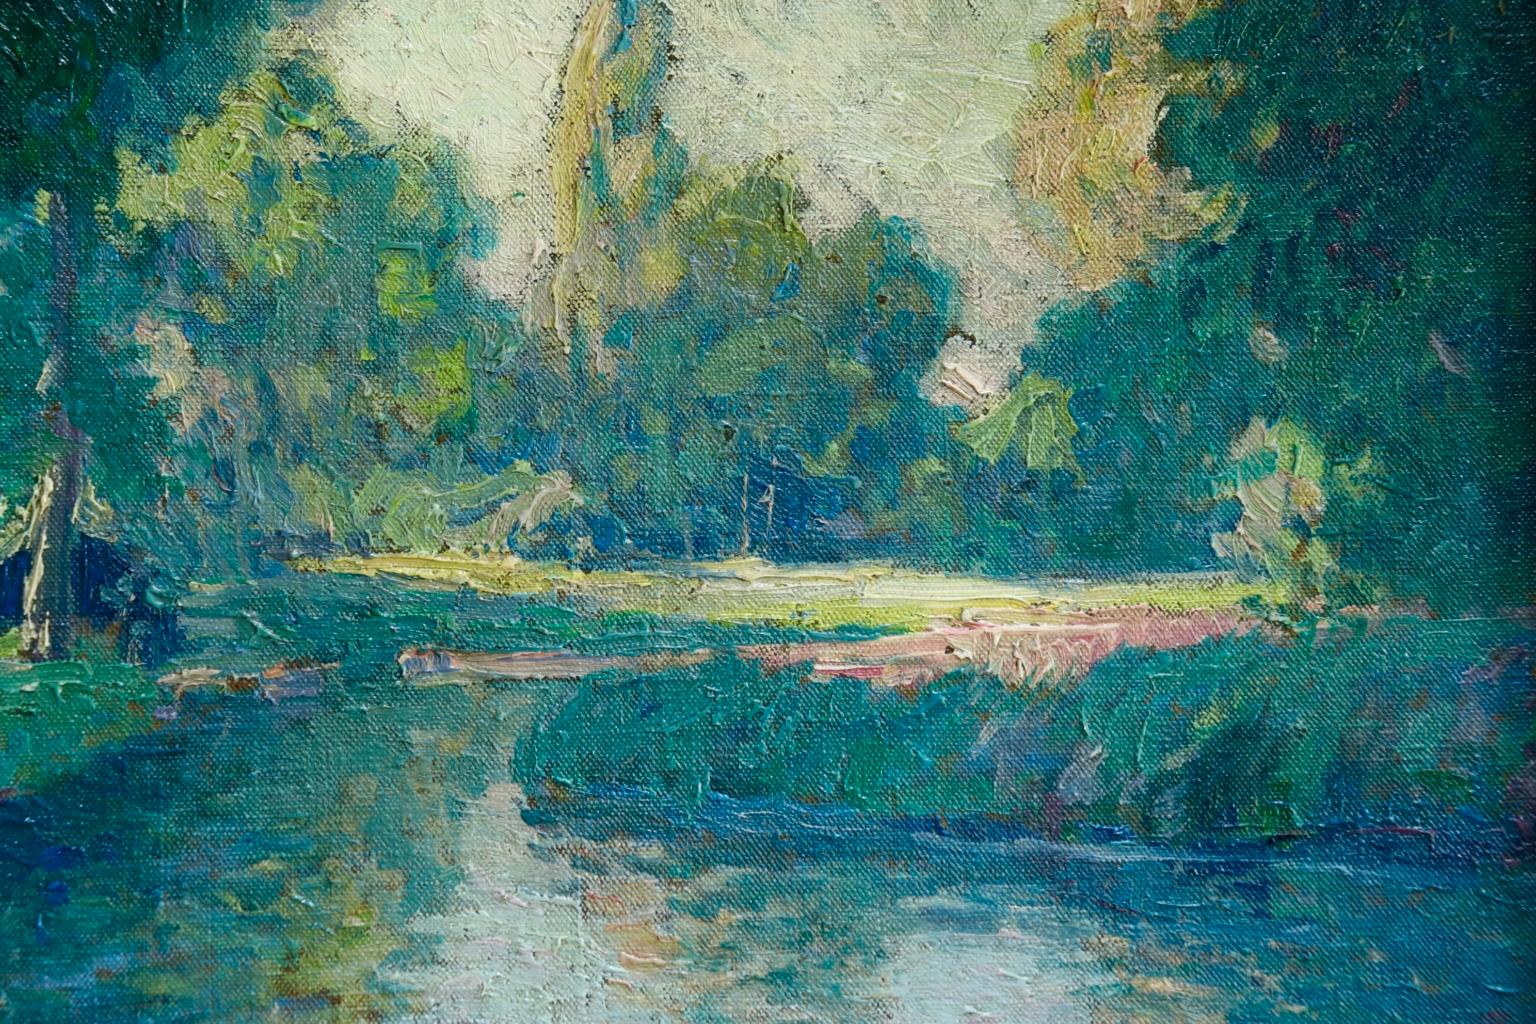 The Creuse Valley - Post Impressionist Oil, River in Landscape by Paul Madeline 3